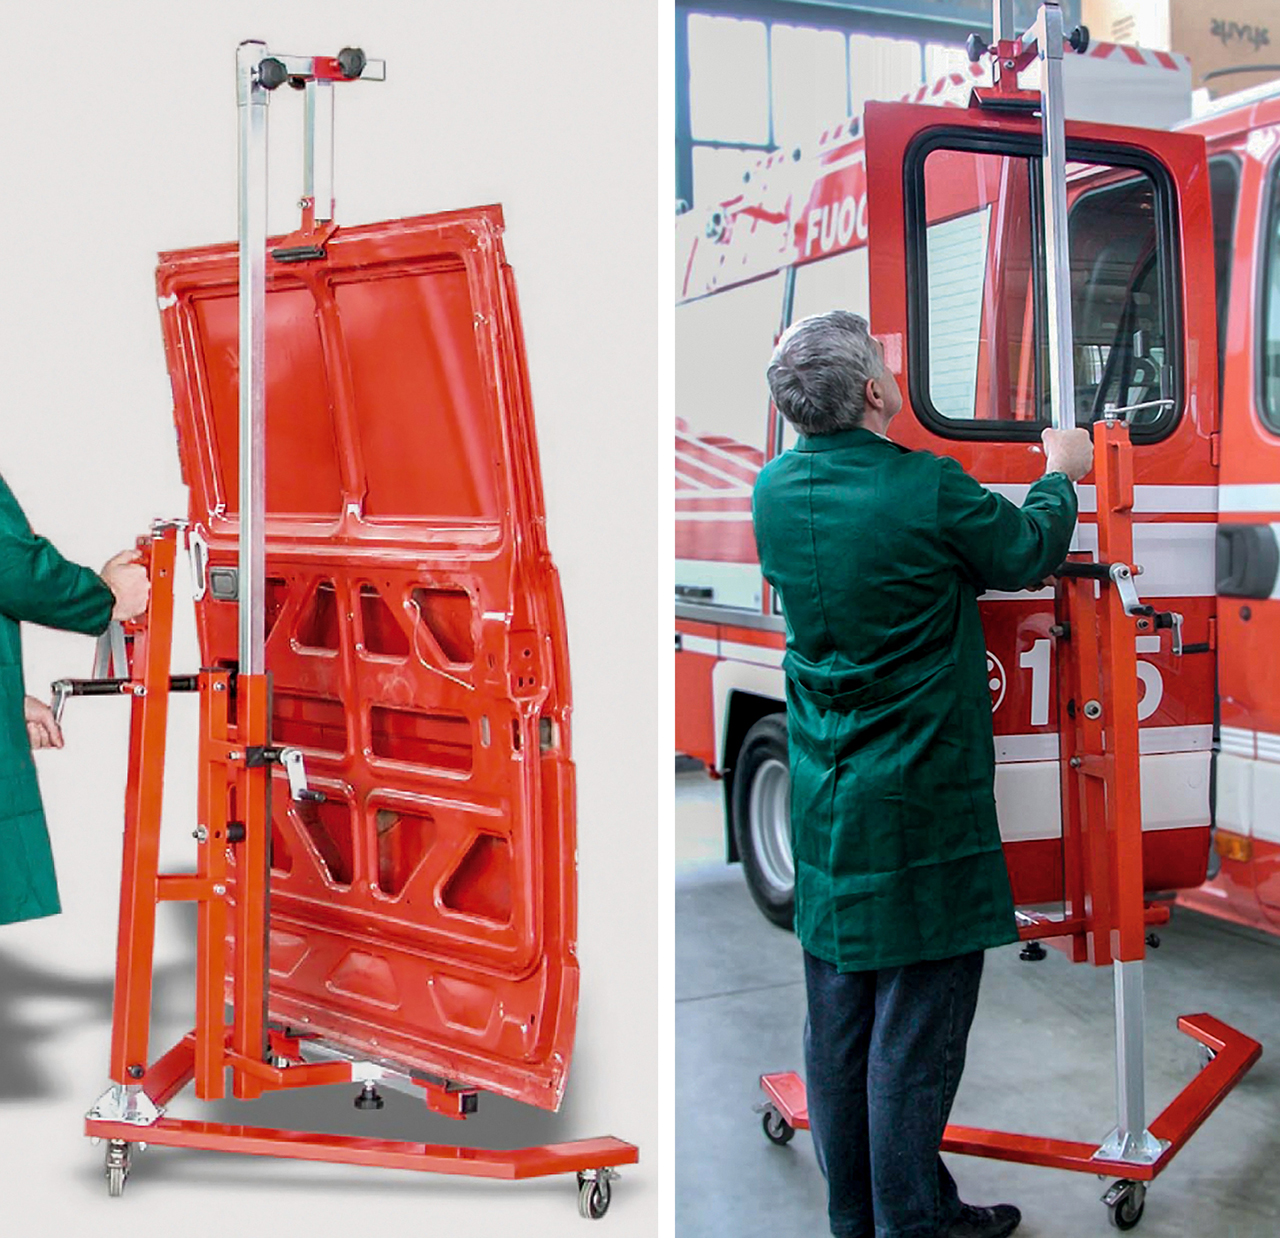 Easy one-man door removing and refitting with this mobile door installer from Power-TEC